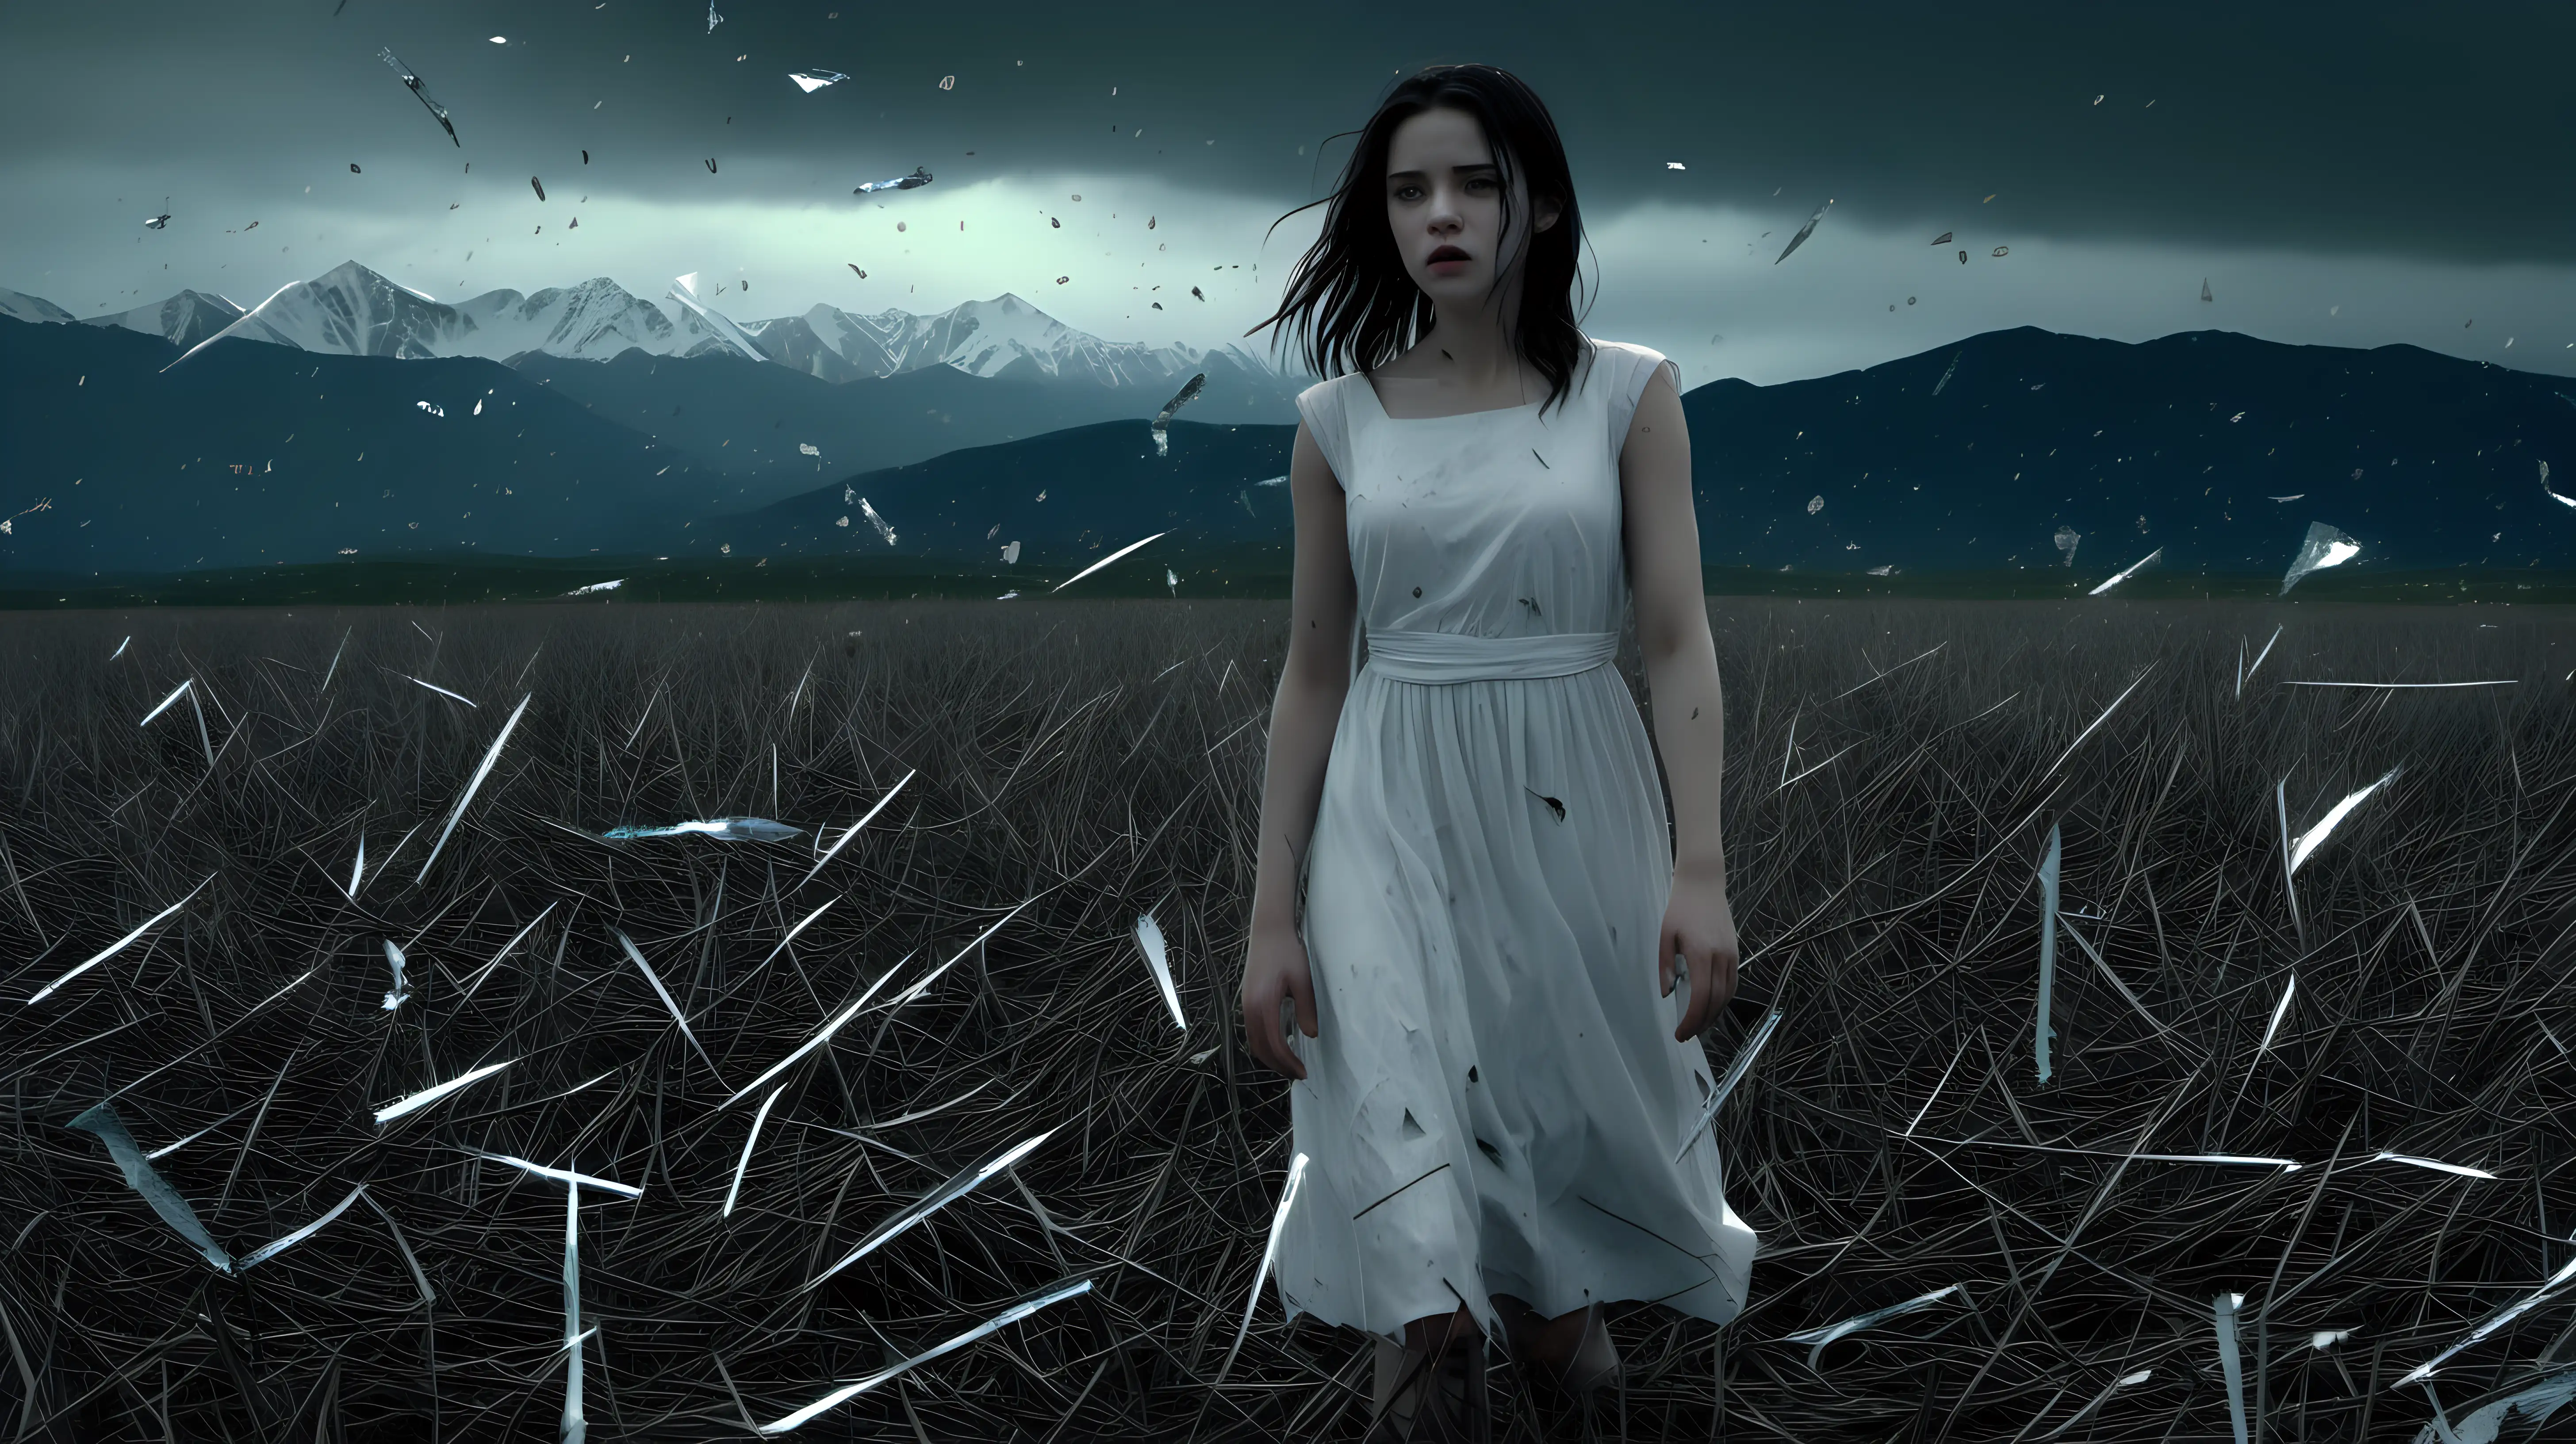 Lonely Girl in White Dress under a Grey Sky with Broken Glass Rain